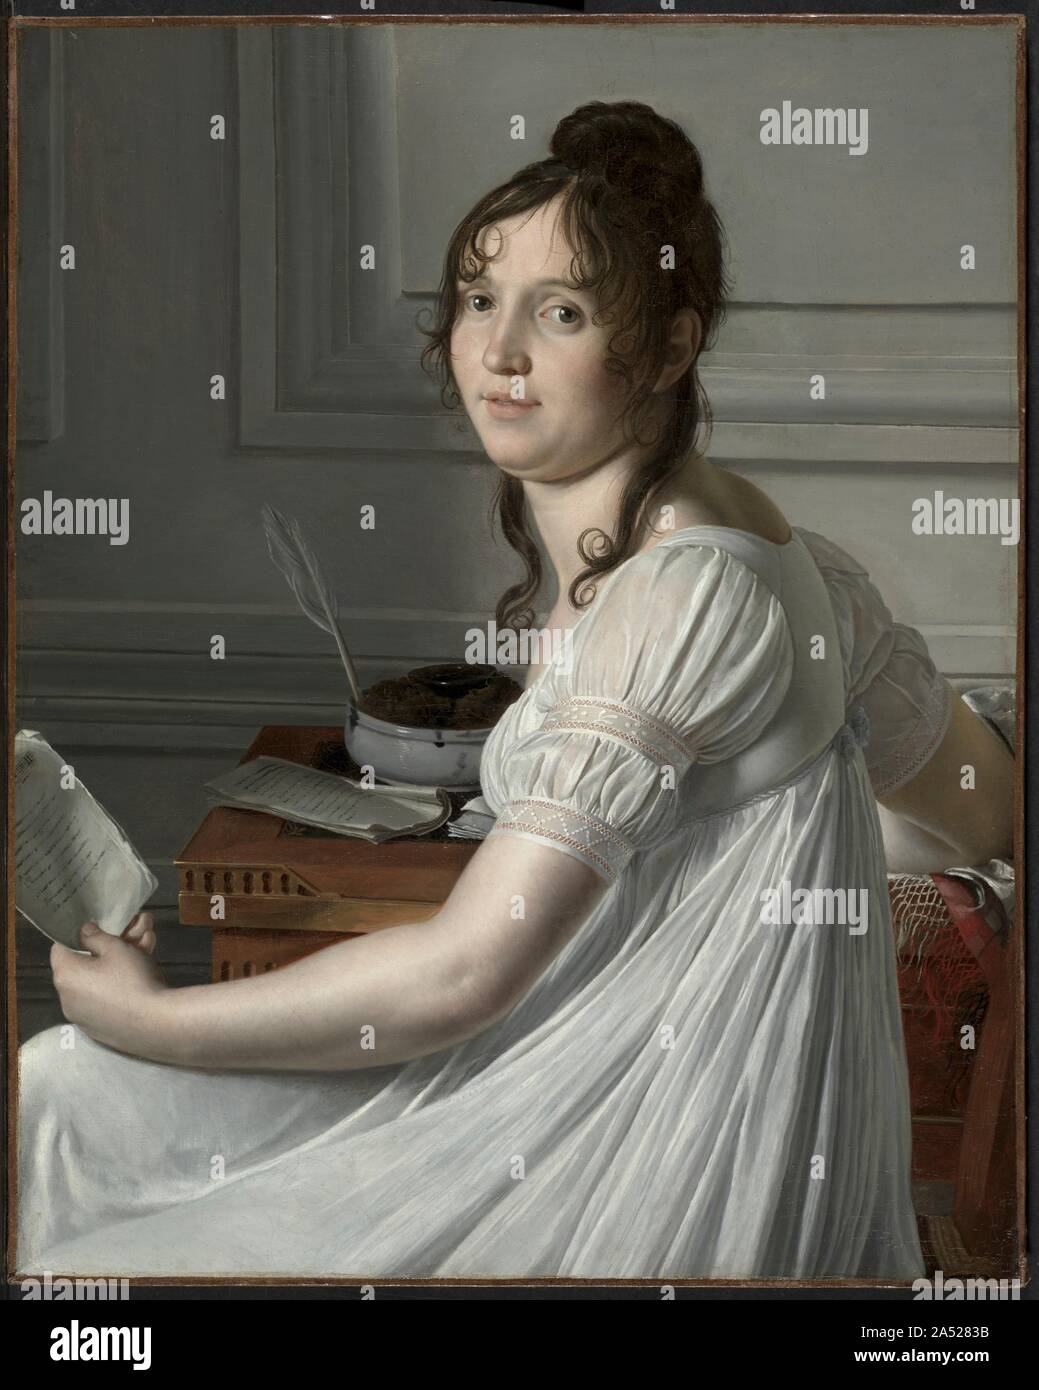 Sophie Crouzet, c. 1801. The sitter's dress deliberately evokes ancient Roman costume. However, the white muslin and straightforward cut also derives from earlier English fashions that favored simplicity in contrast to the elaborate, colourful clothing favored earlier in the 1700s. The transparency of her dress also carries political and cultural meaning: during the French Revolution in 1789, costume began to signify political allegiance, a sign of the character of the person who wore it. For women, transparency became increasingly literal, as in the sheer fabric worn by Crouzet, who came from Stock Photo